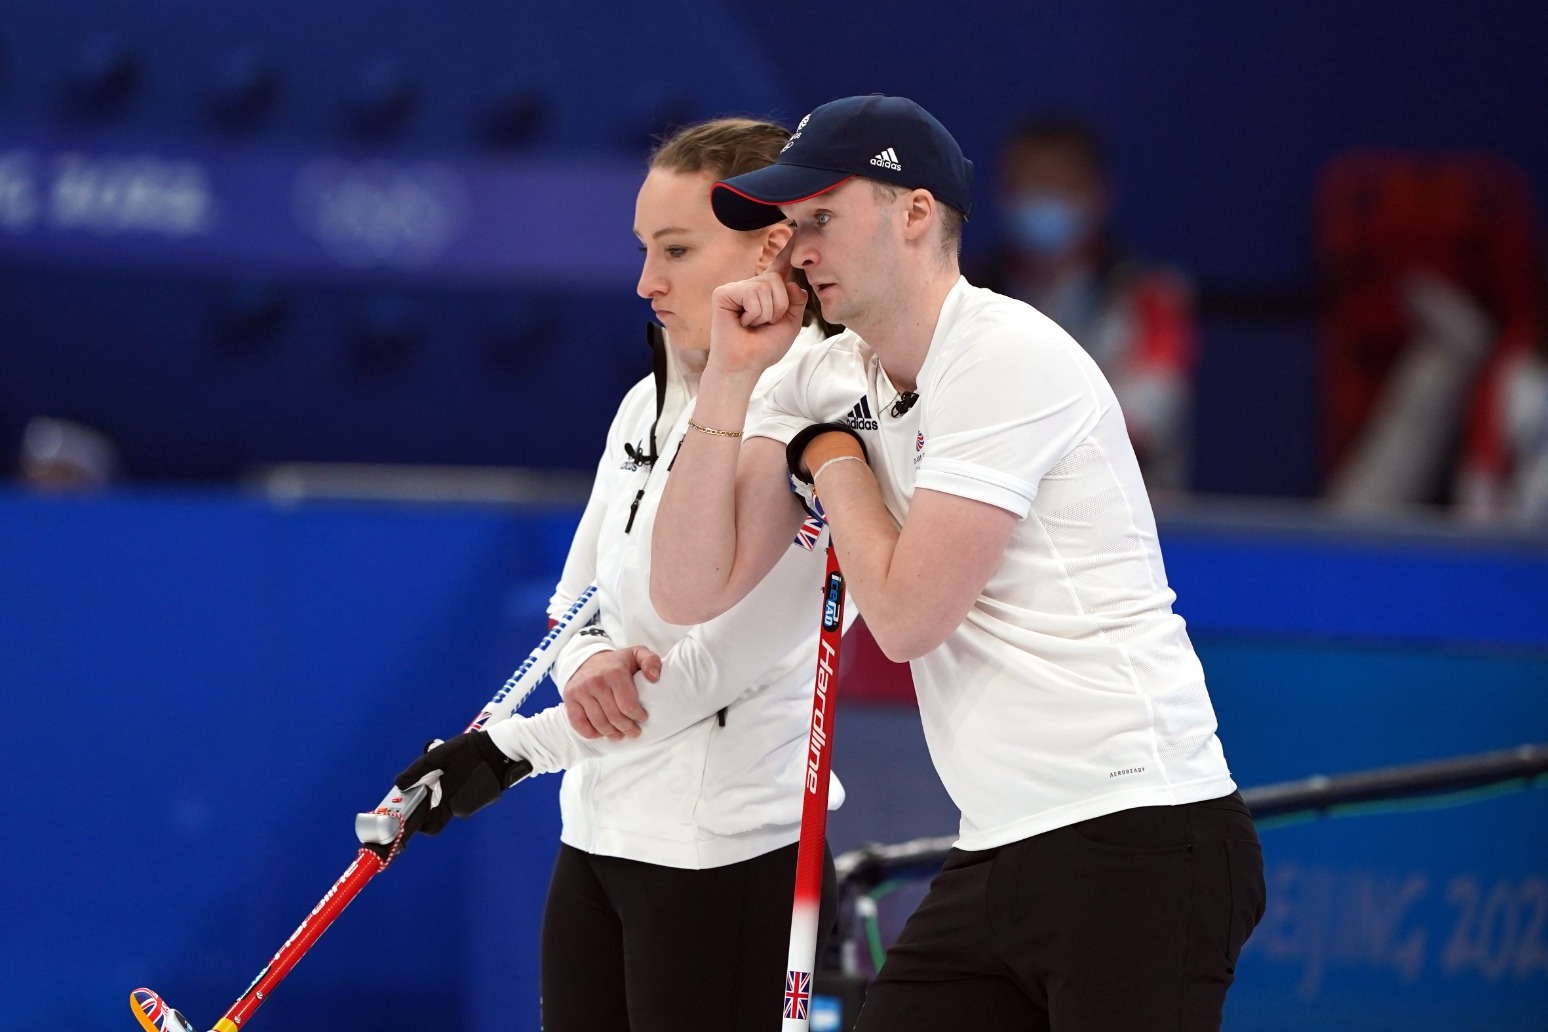 Bruce Mouat and Jennifer Dodds miss out on curling bronze at Winter Olympics 